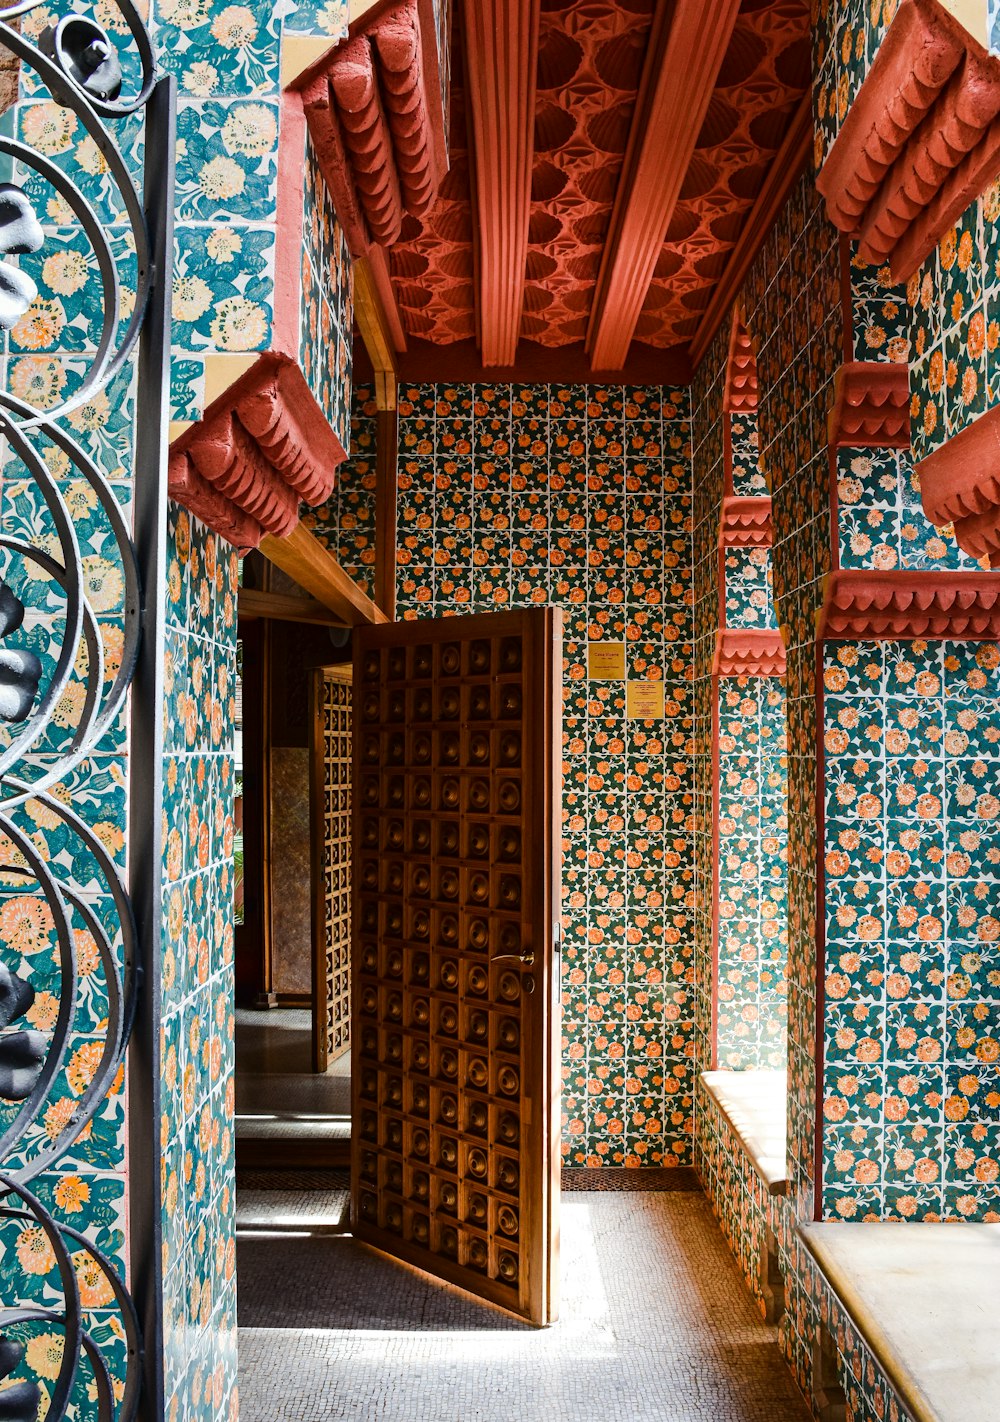 a hallway in a building with colorful wallpaper